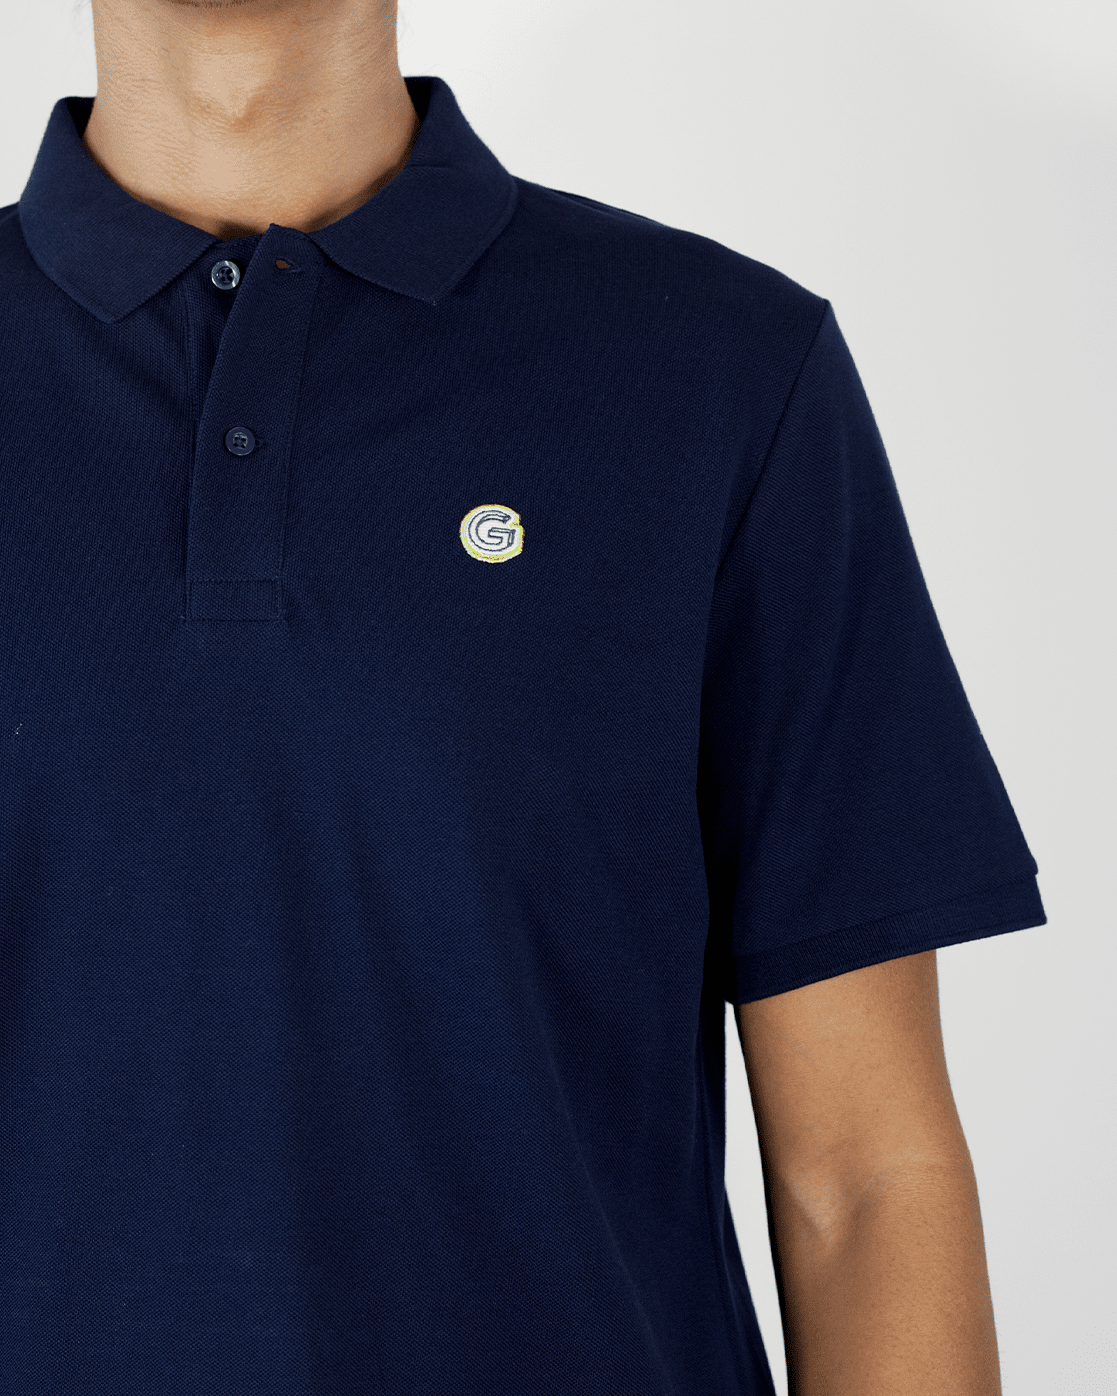 Polo G29 Patch Brod